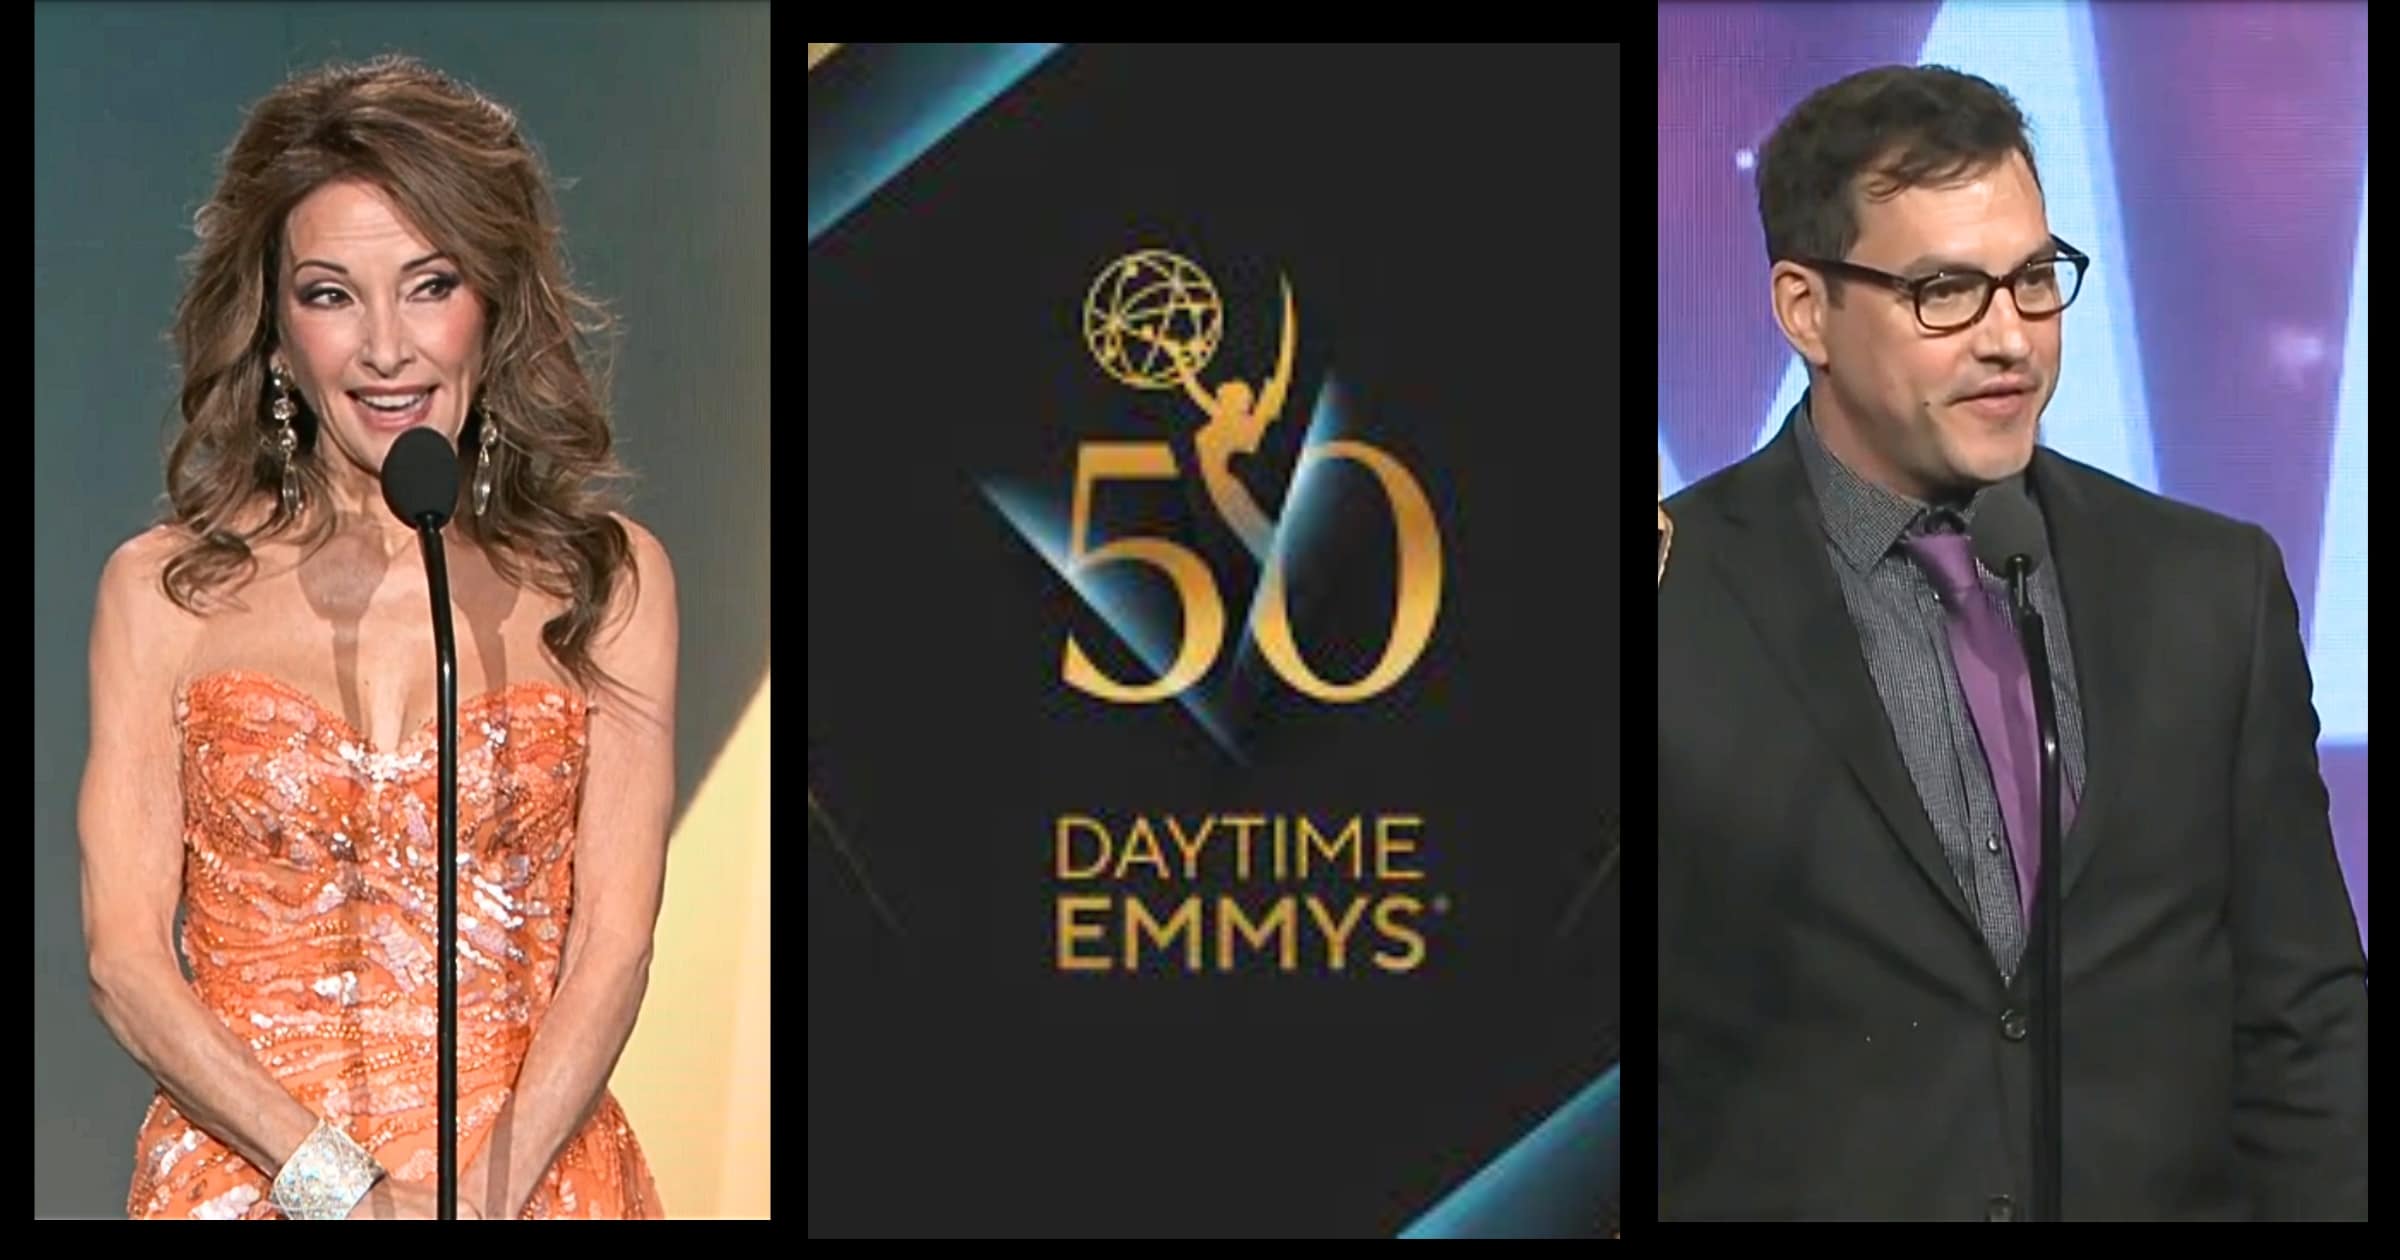 Daytime Emmys - Susan Lucci and Tyler Christopher